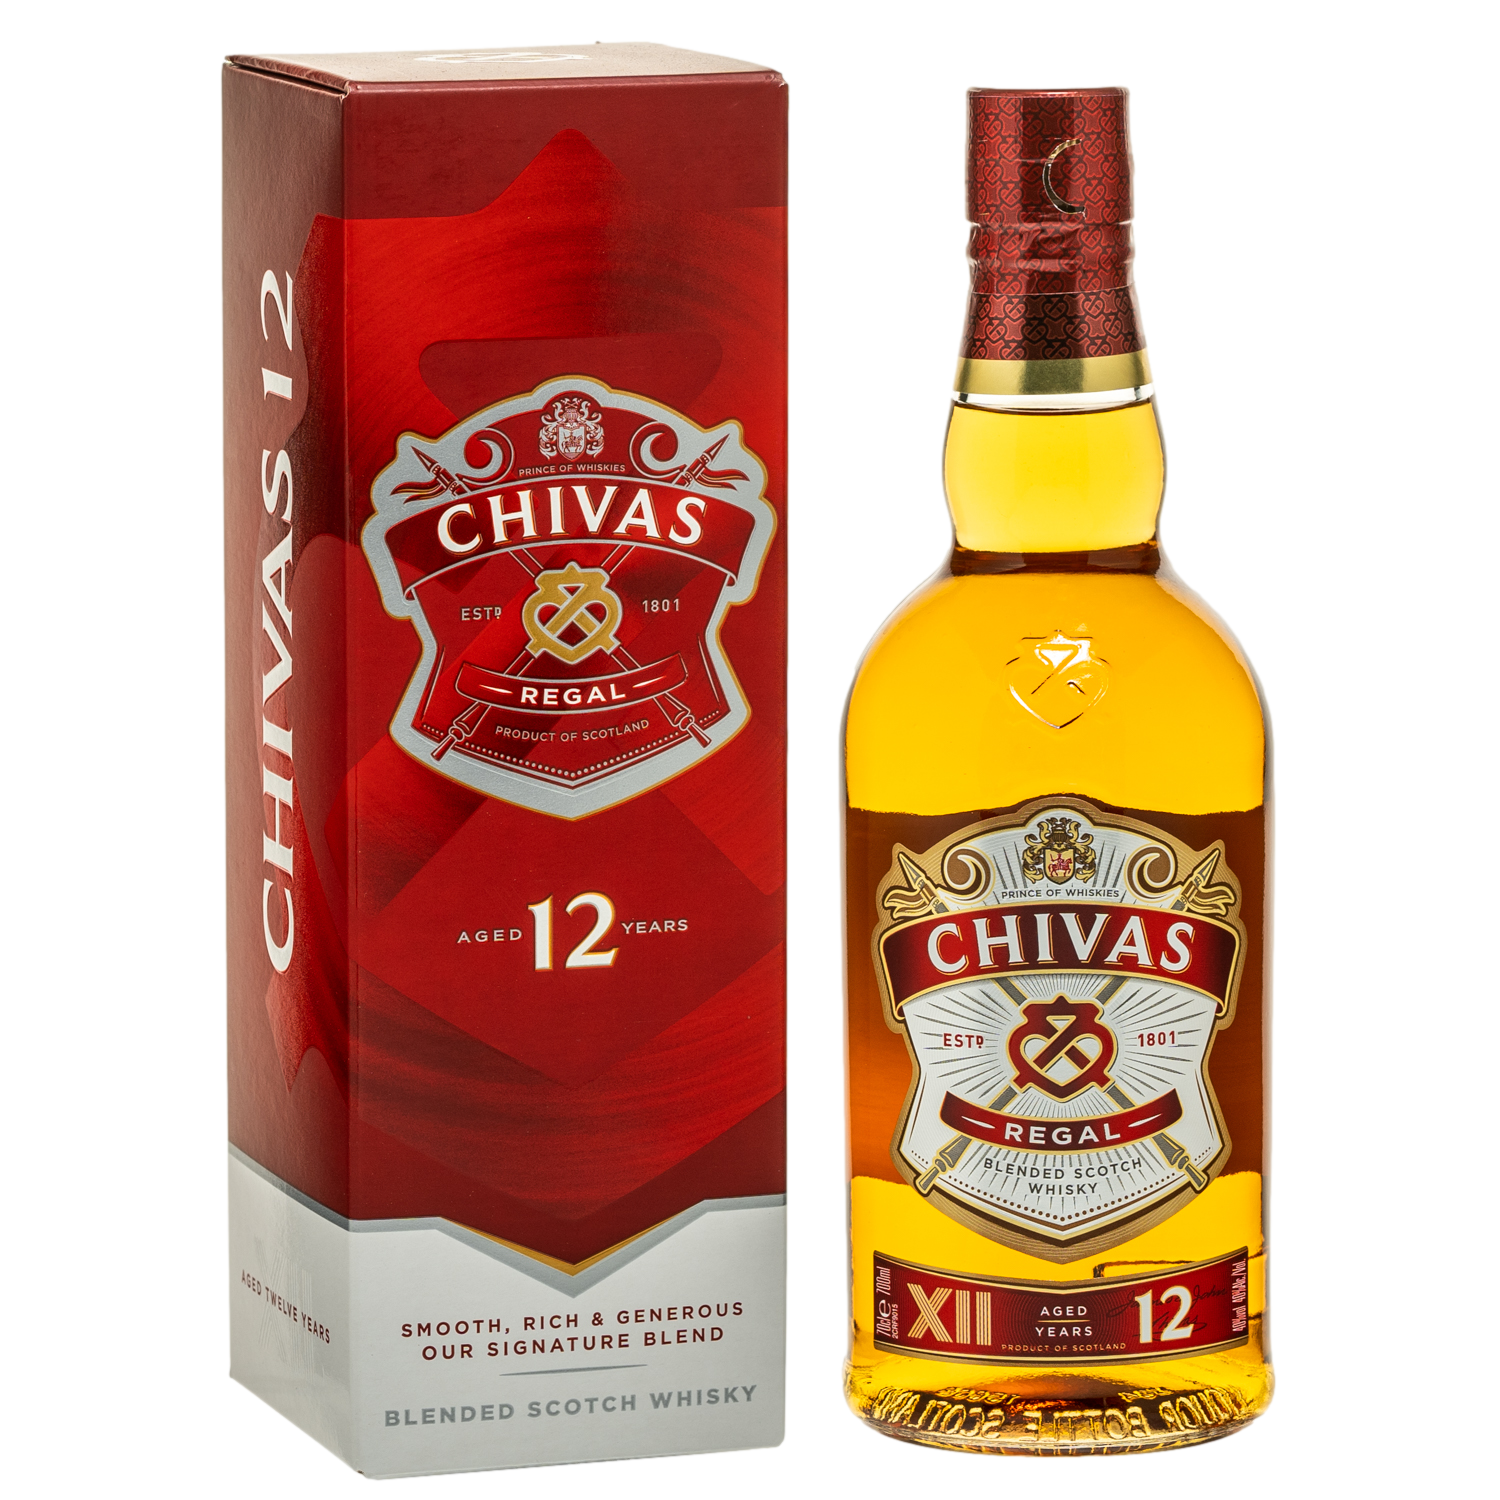 Regal Barrel - Chivas Brothers - Scotch Whisky 12 Whisky Jahre Blended